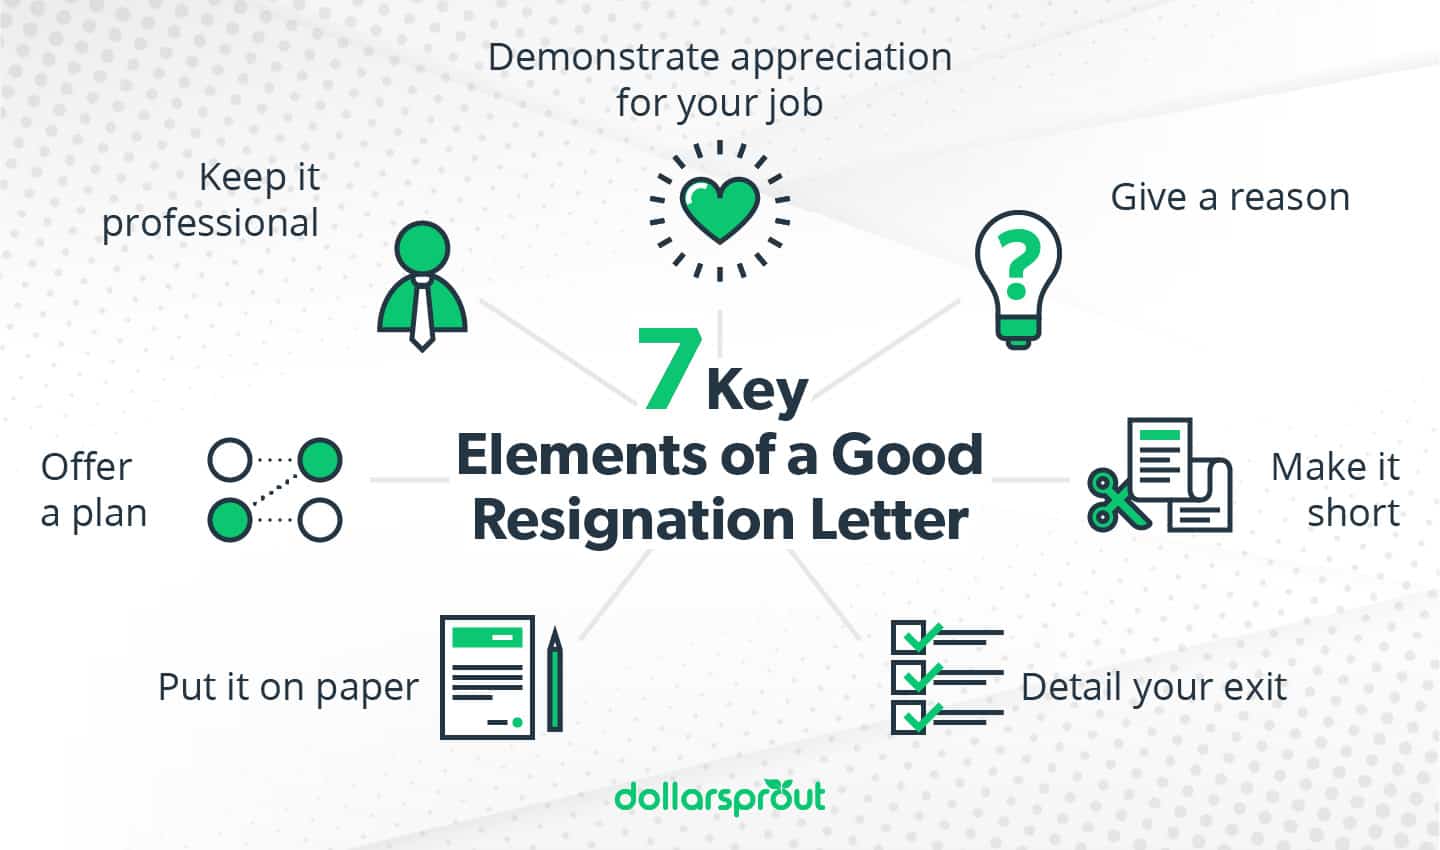 key elements of a good resignation letter infographic